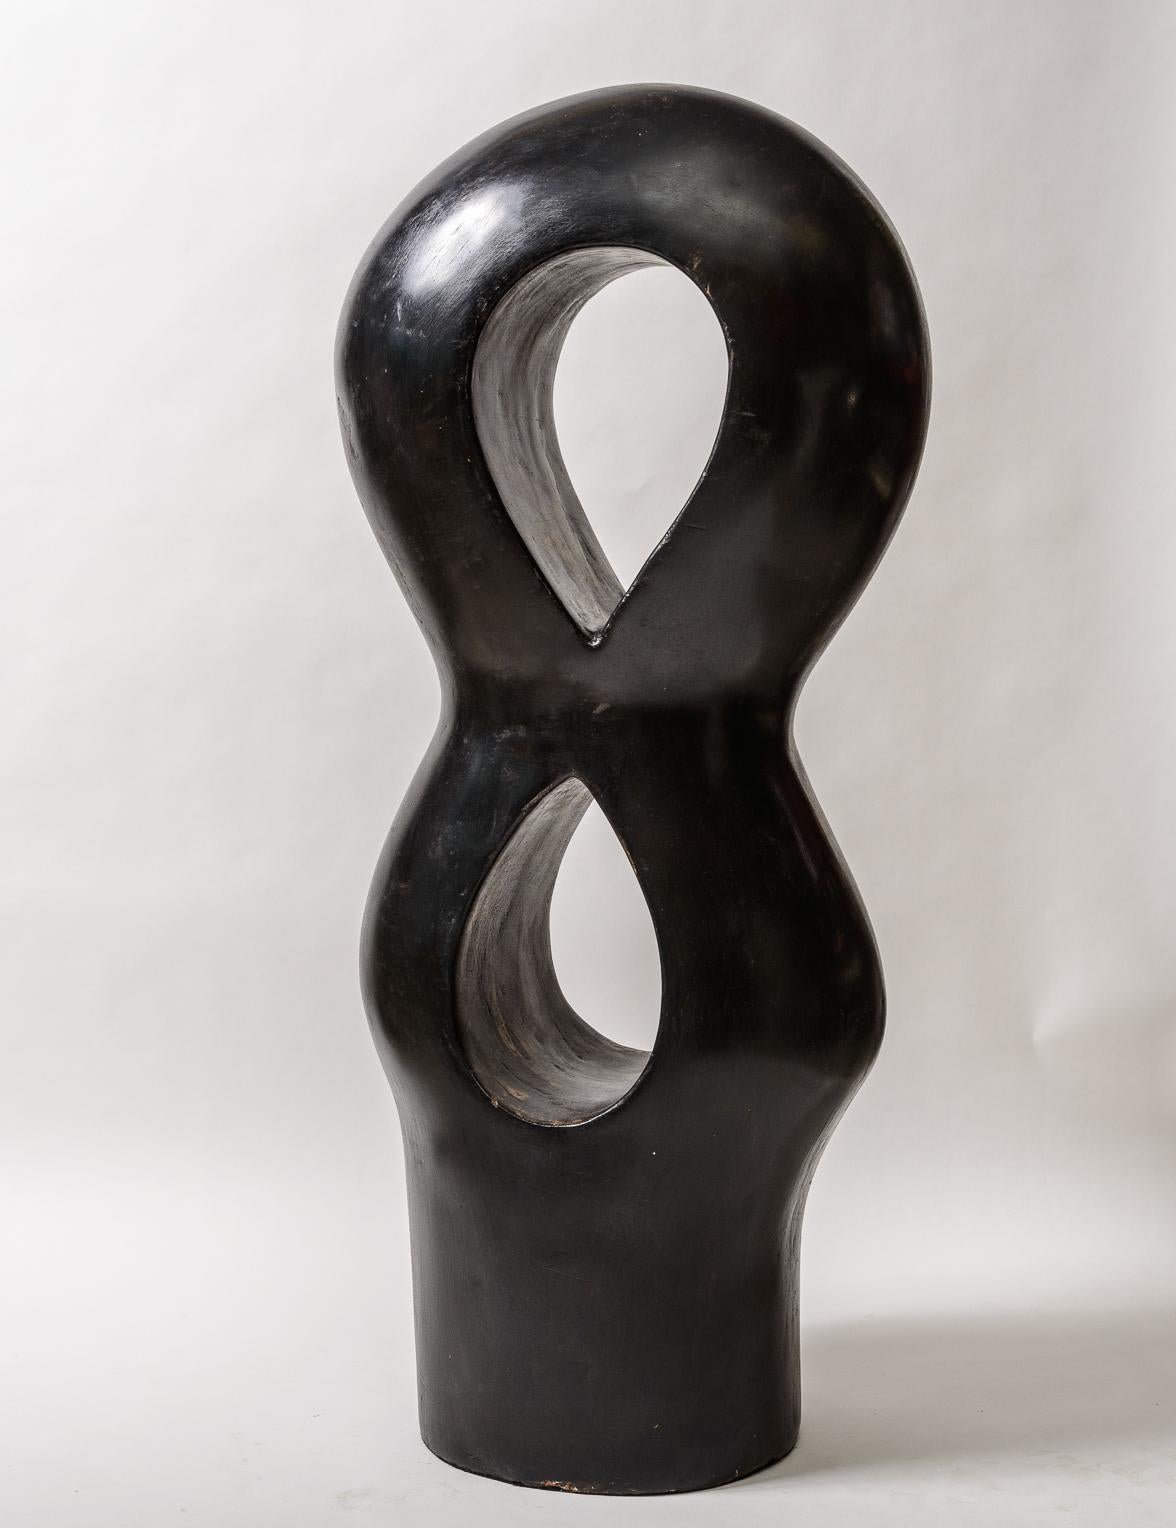 A large ceramic Totem sculpture.
Variegated surface of Black with areas of Tan/Brown showing.
Primitive yet Modern.See photo with the sculpture next to a soda can 
to give you a sense of scale